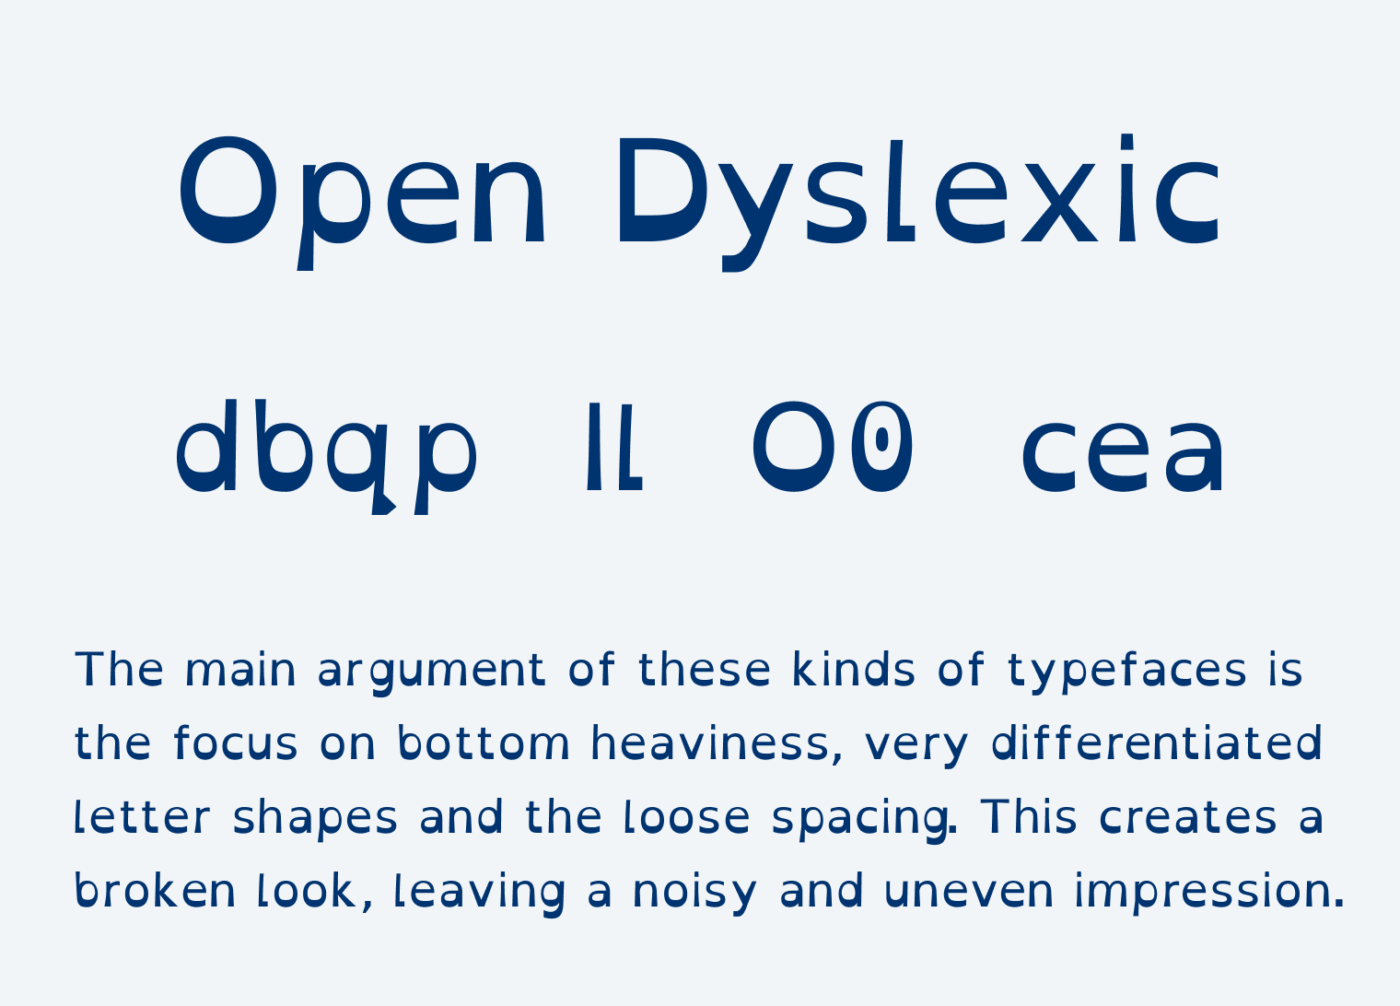 Open Dyslexic: The main argument of these kinds of typefaces is the focus on bottom heaviness, very differentiated letter shapes and the loose spacing. This creates a broken look, leaving a noisy and uneven impression.